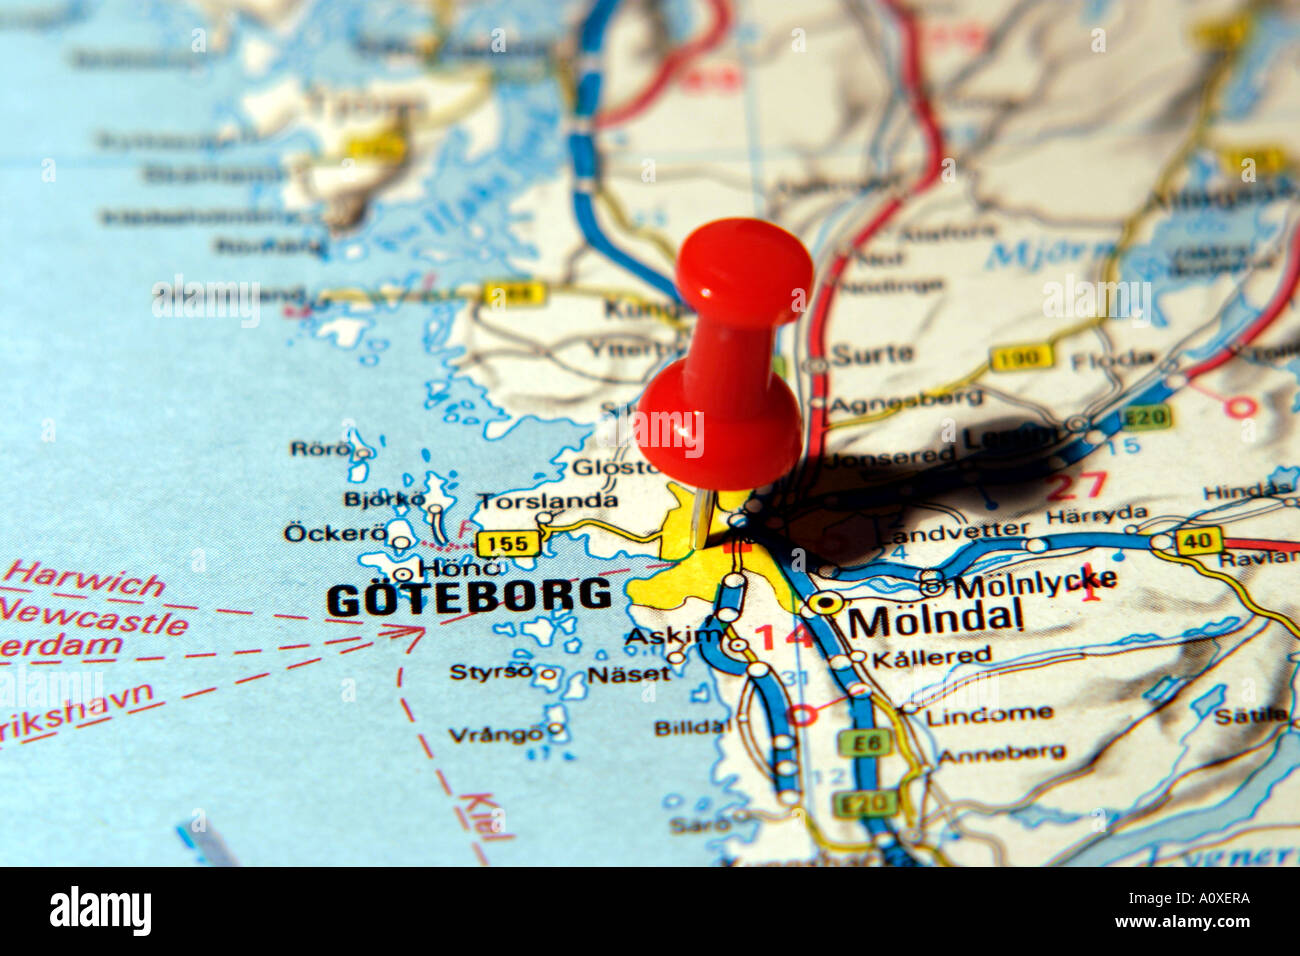 Map Pin pointing to Gothenburg , Sweden on a road map Stock Photo